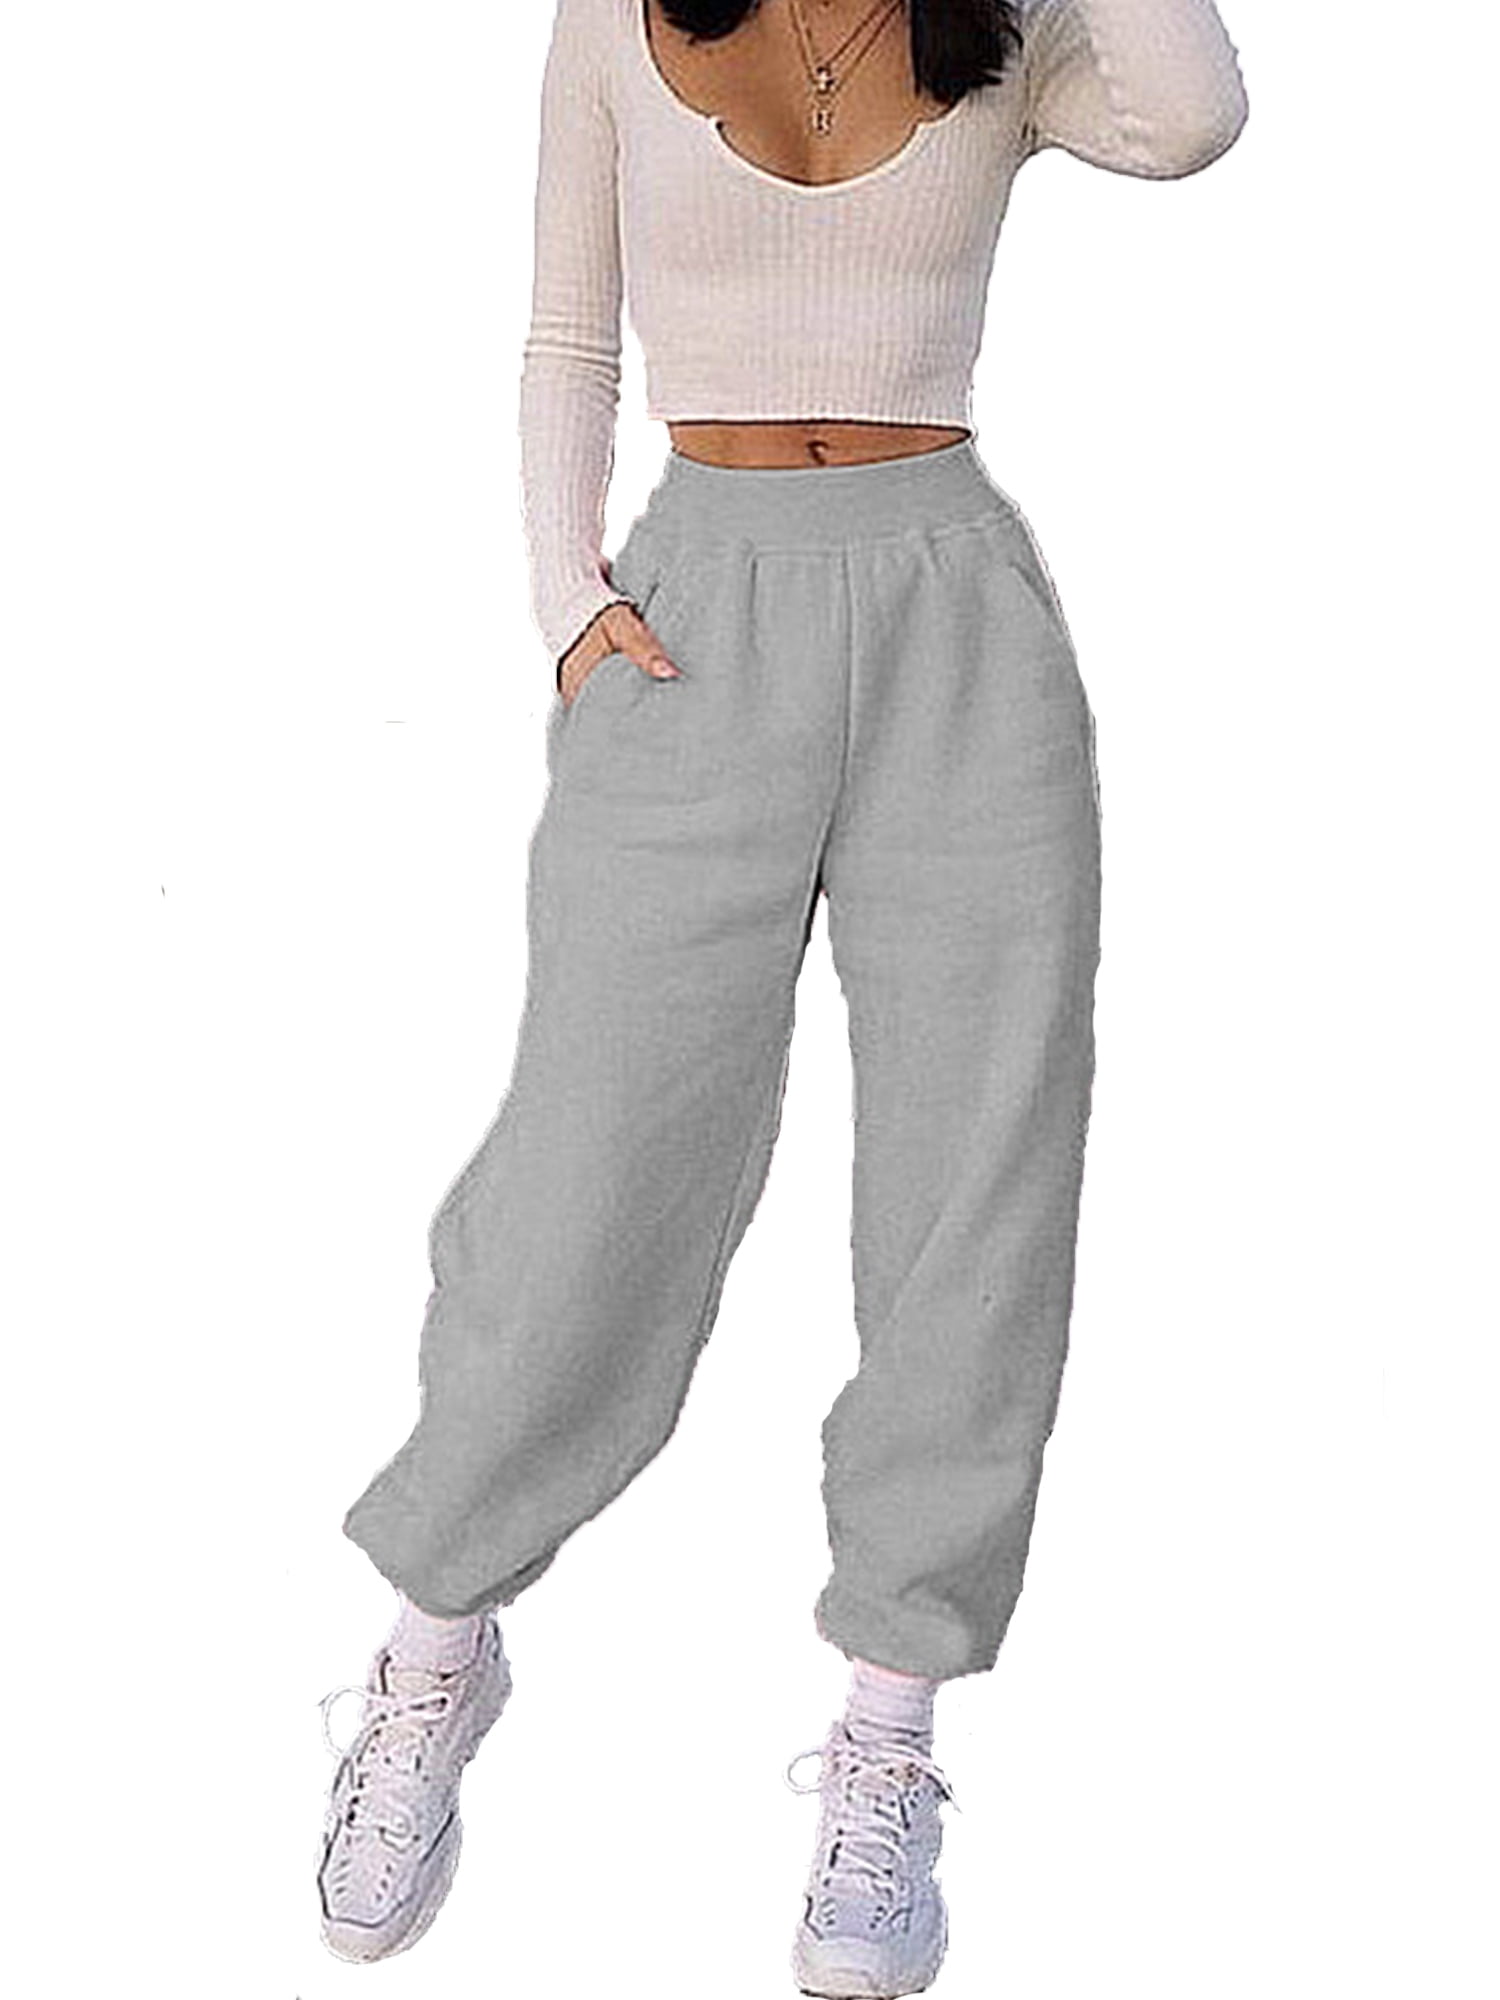  Women Tie Dye Harem Pants Casual High Waist with Drawstring  Loose Cargo Joggers Sweatpants Deep Blue : Clothing, Shoes & Jewelry